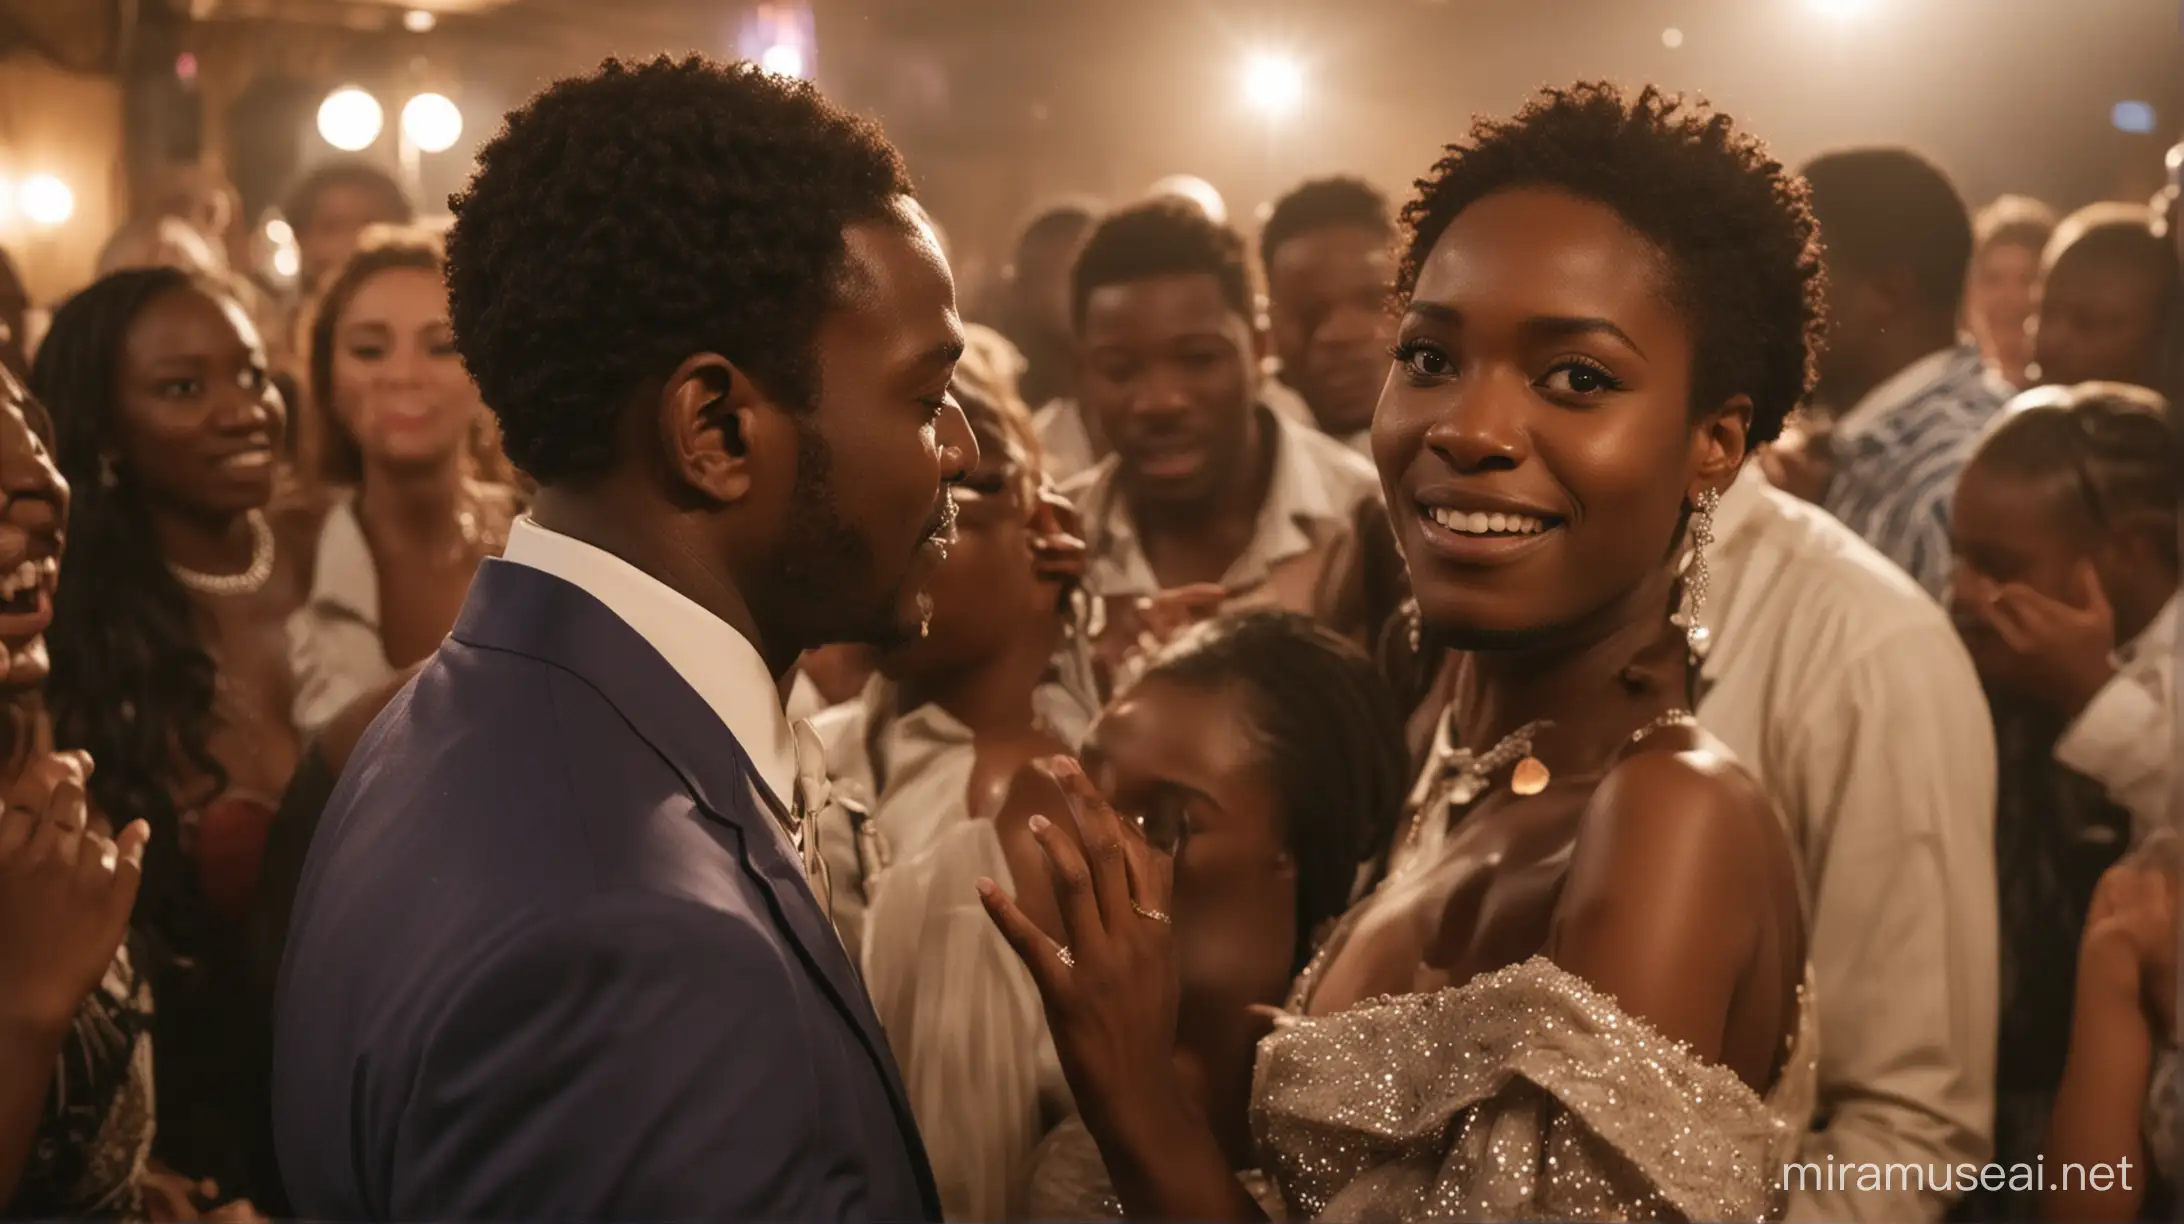 The camera pans to people at a party NOT A WEDDING  a burst of a fateful evening, the AFRICAN couple’s eyes meet across the crowded dance floor, sparks igniting their souls.